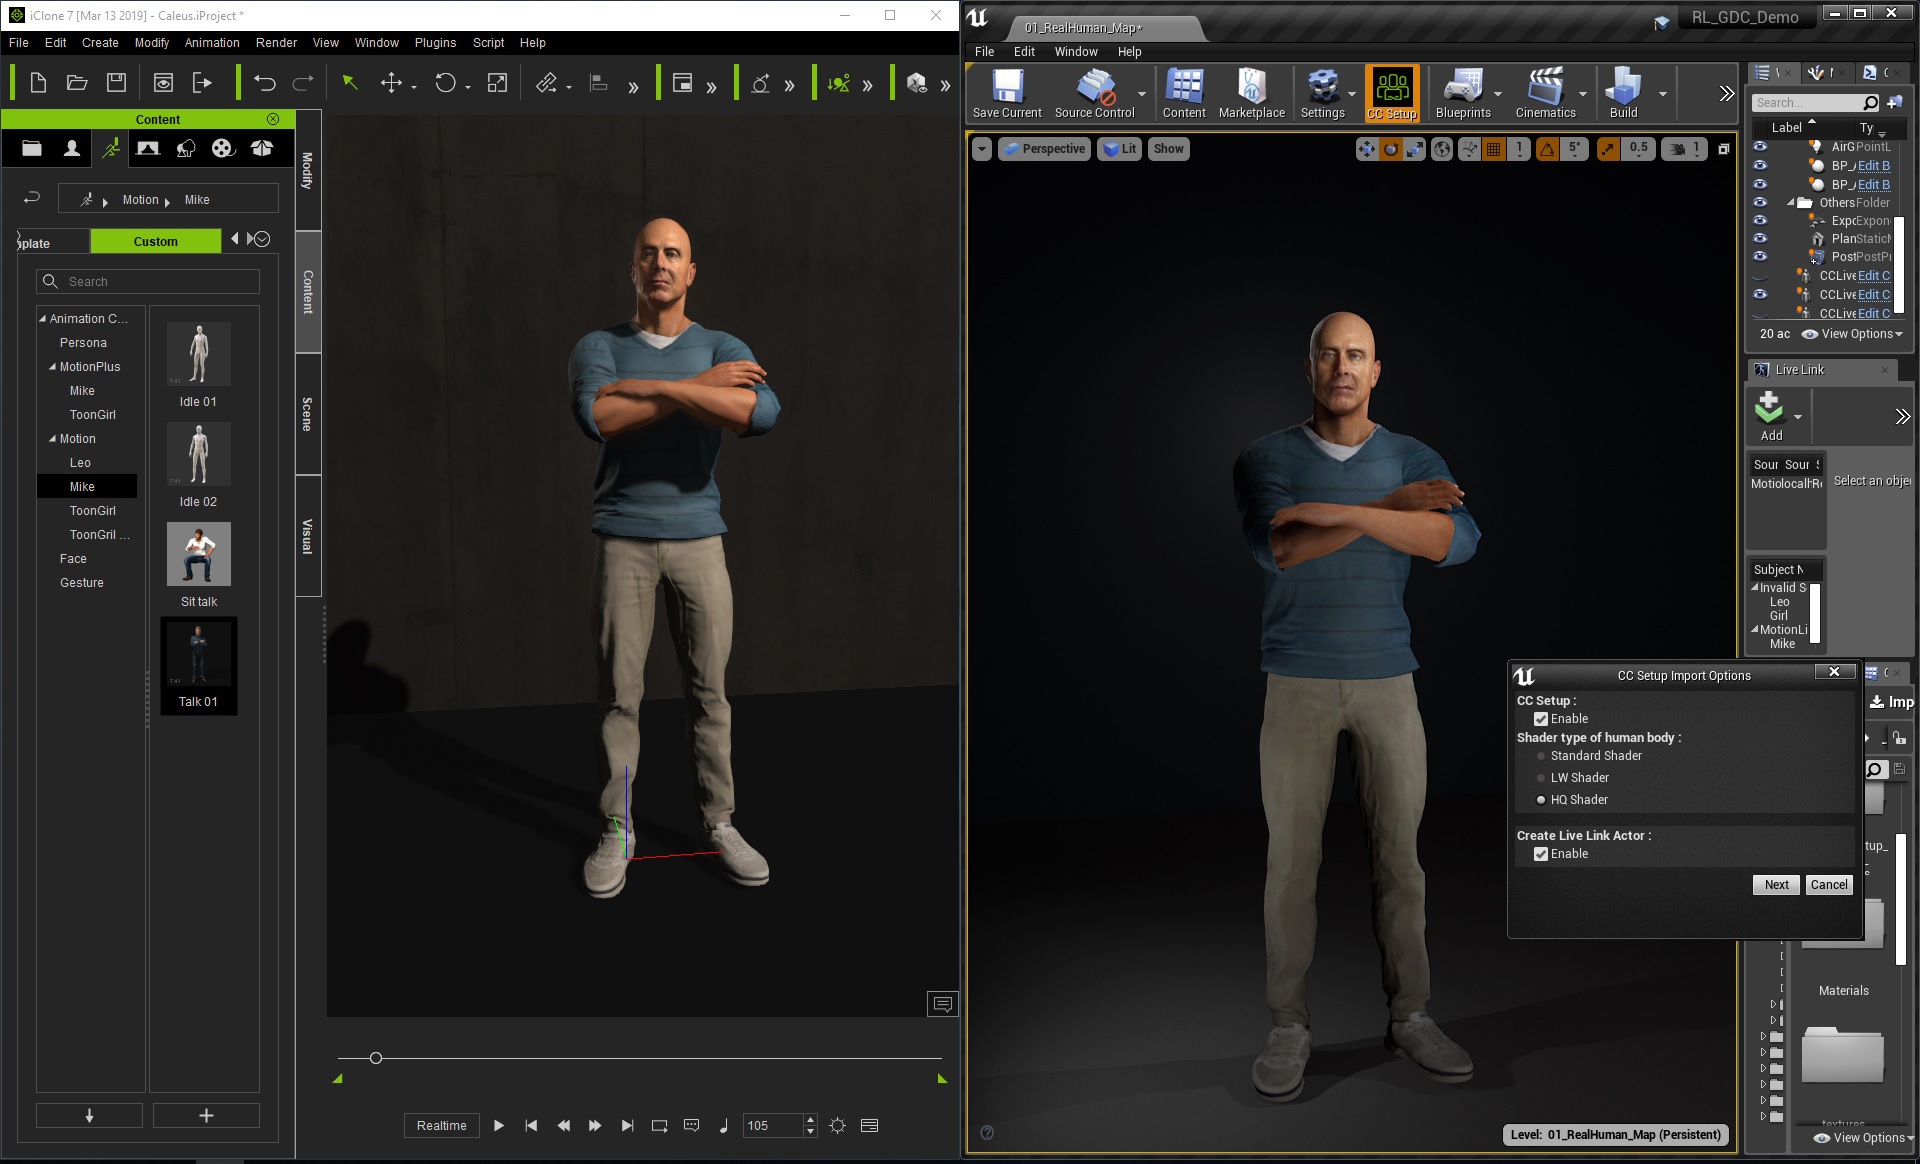 Advanced digital human assignment and shader options